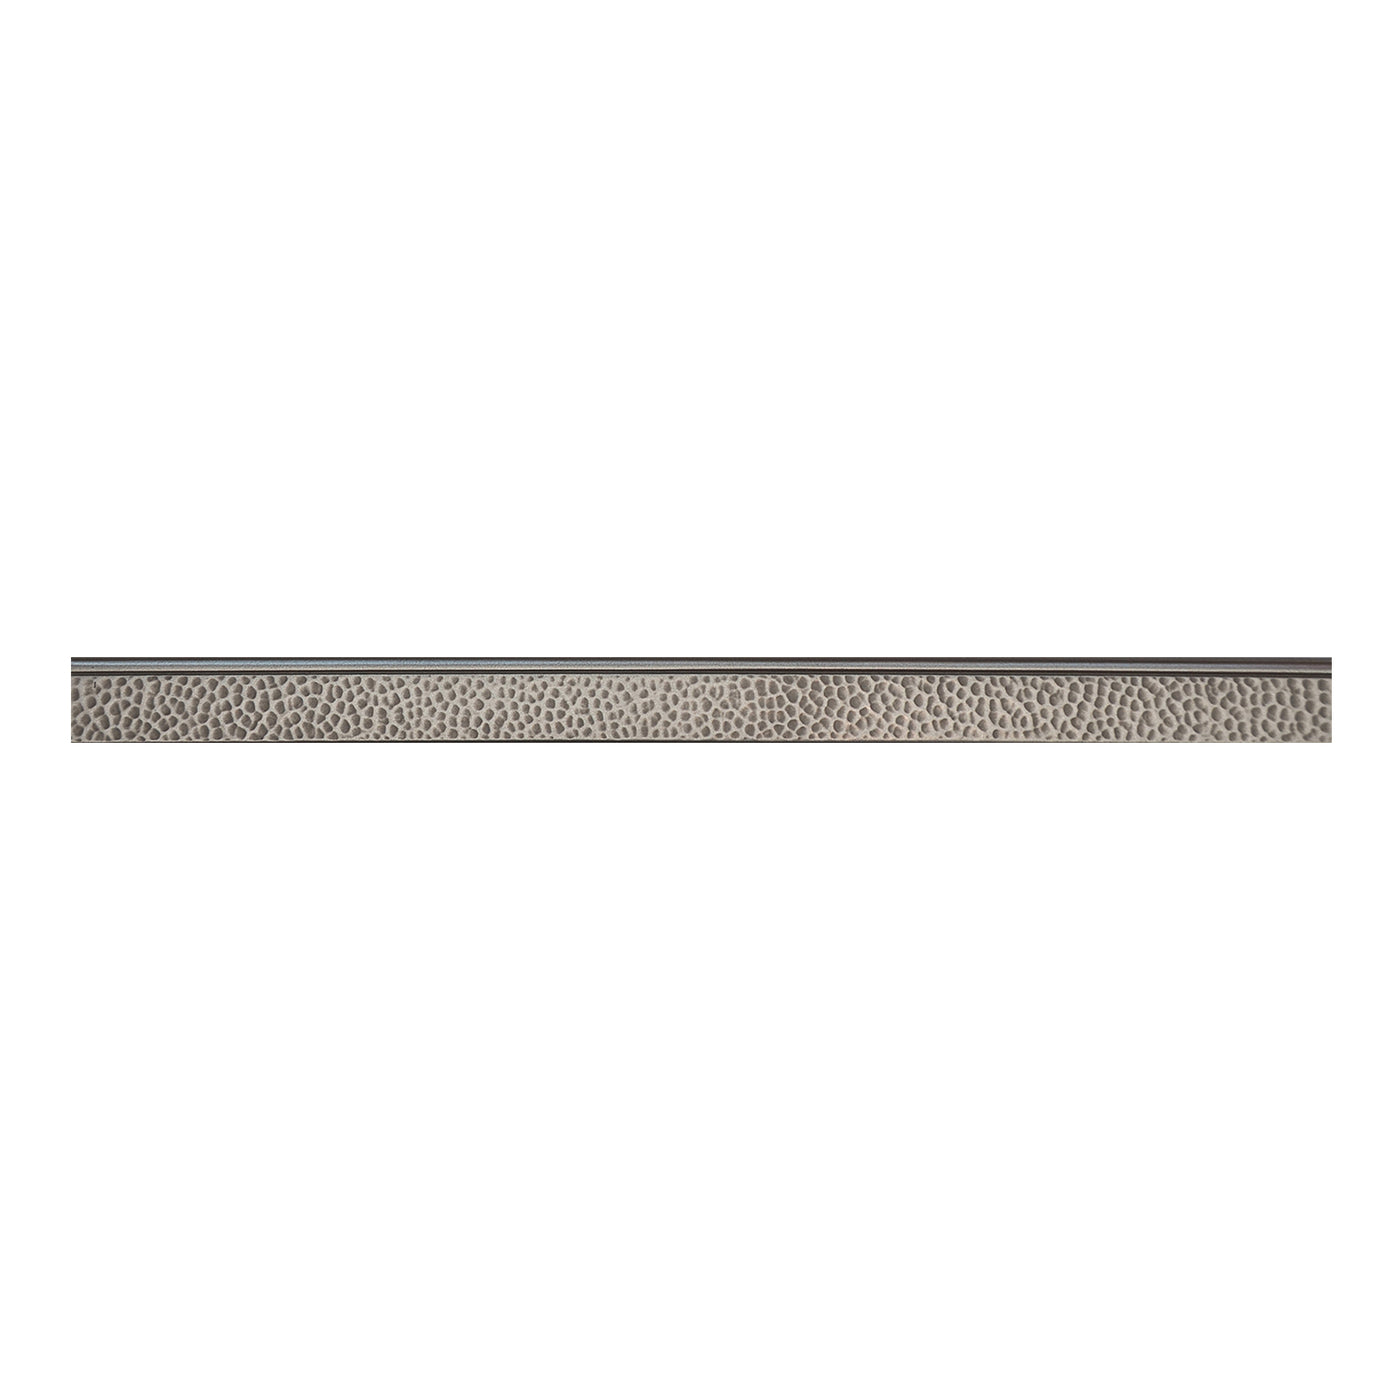 Questech City Scape Hammered 1" x 18" Metal Bullnose